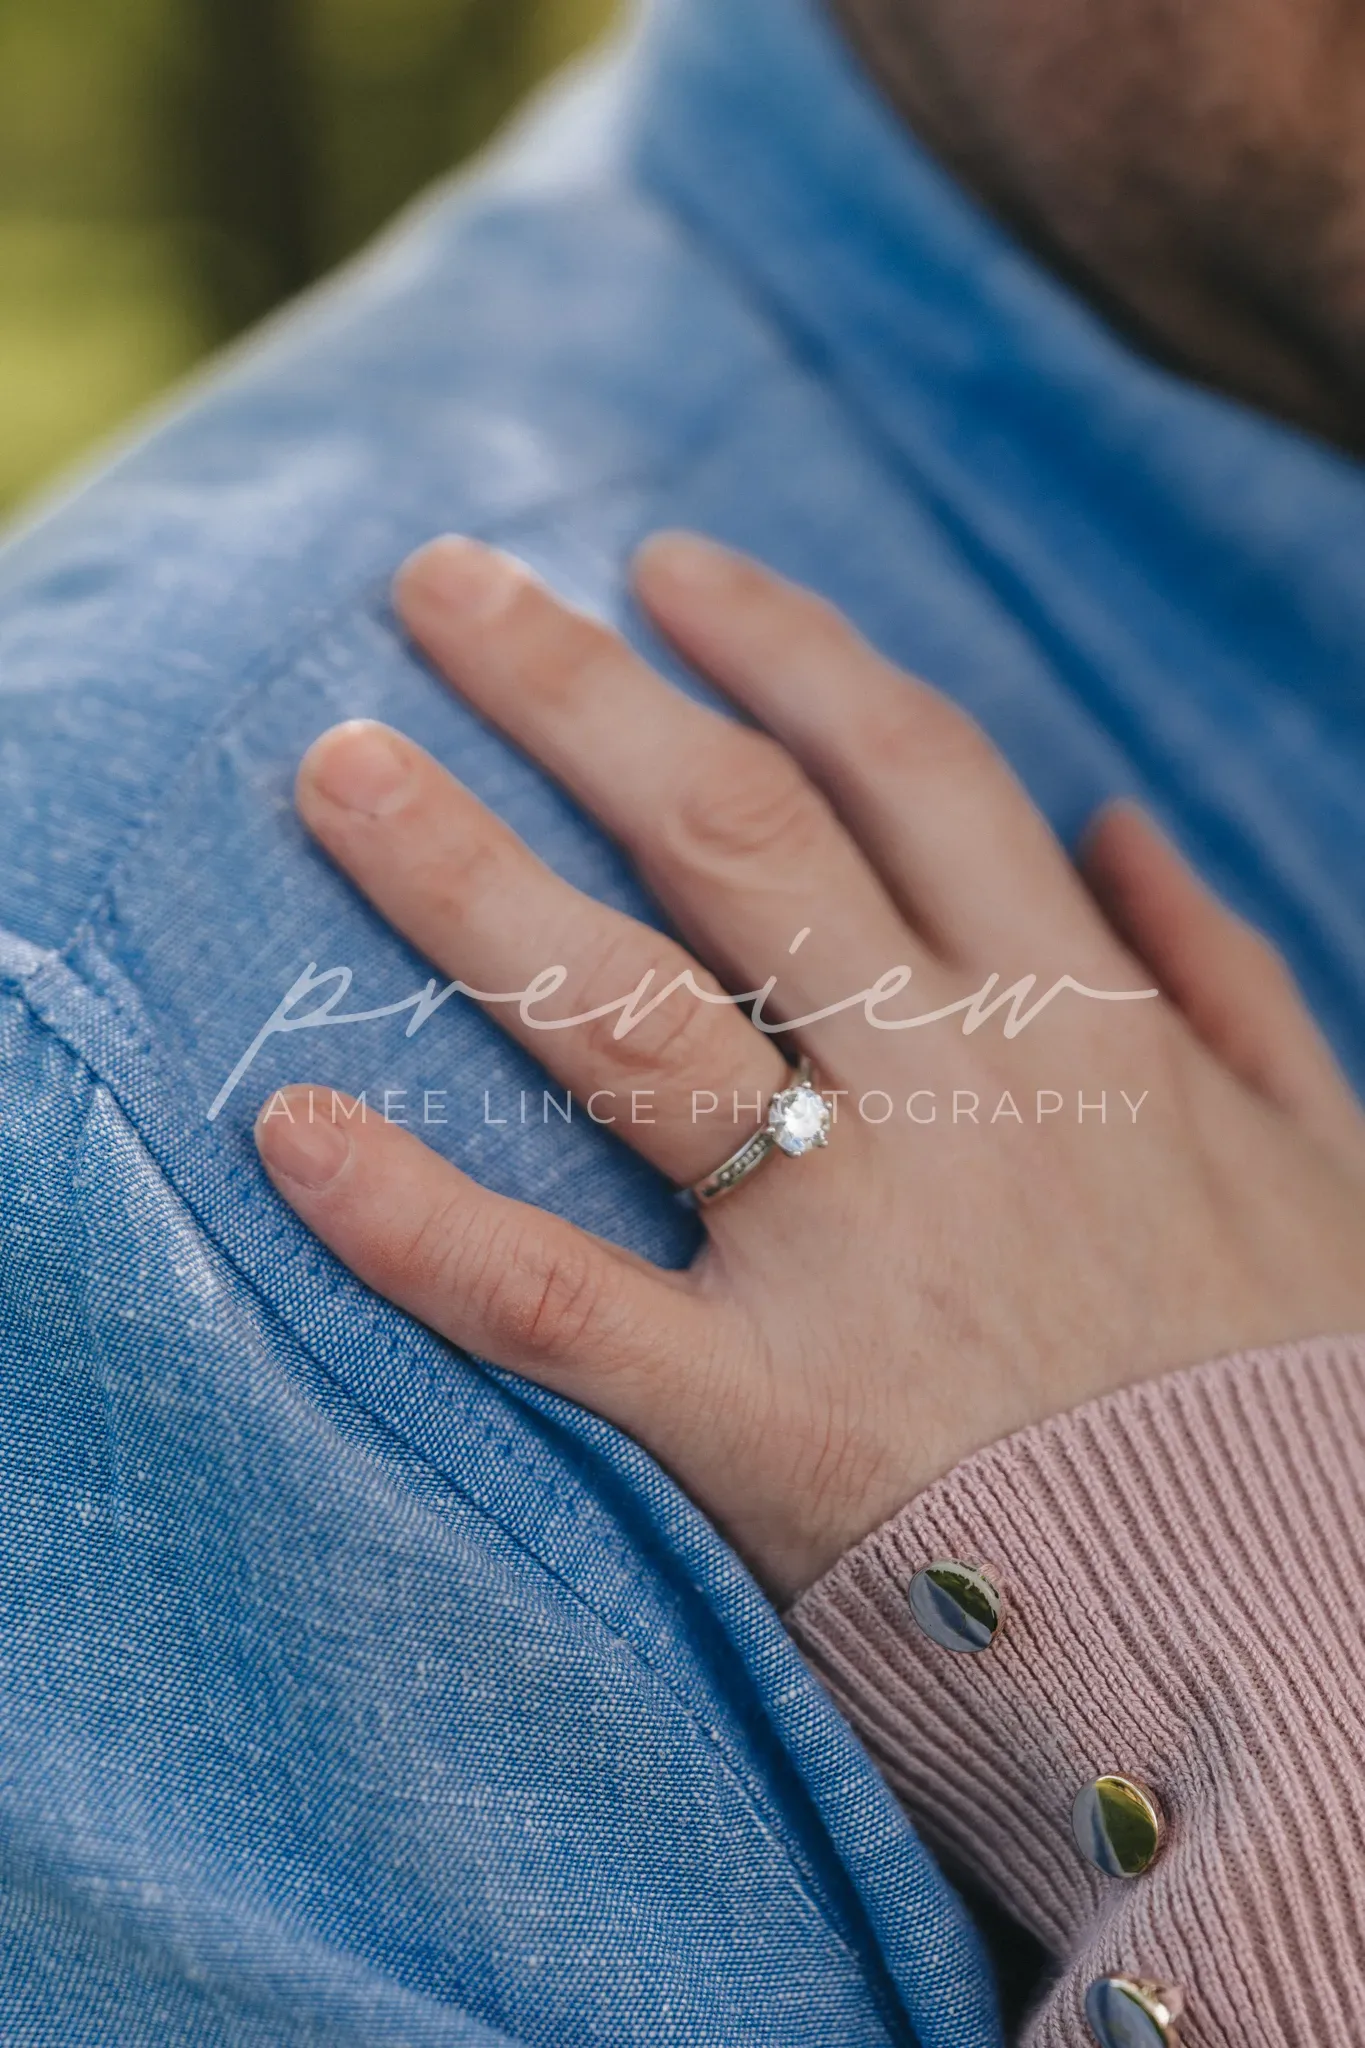 A woman's hand adorned with an engagement ring rests on a man's shoulder, who is wearing a blue shirt. The focus is on the sparkling ring against the blurred background of greenery. The image